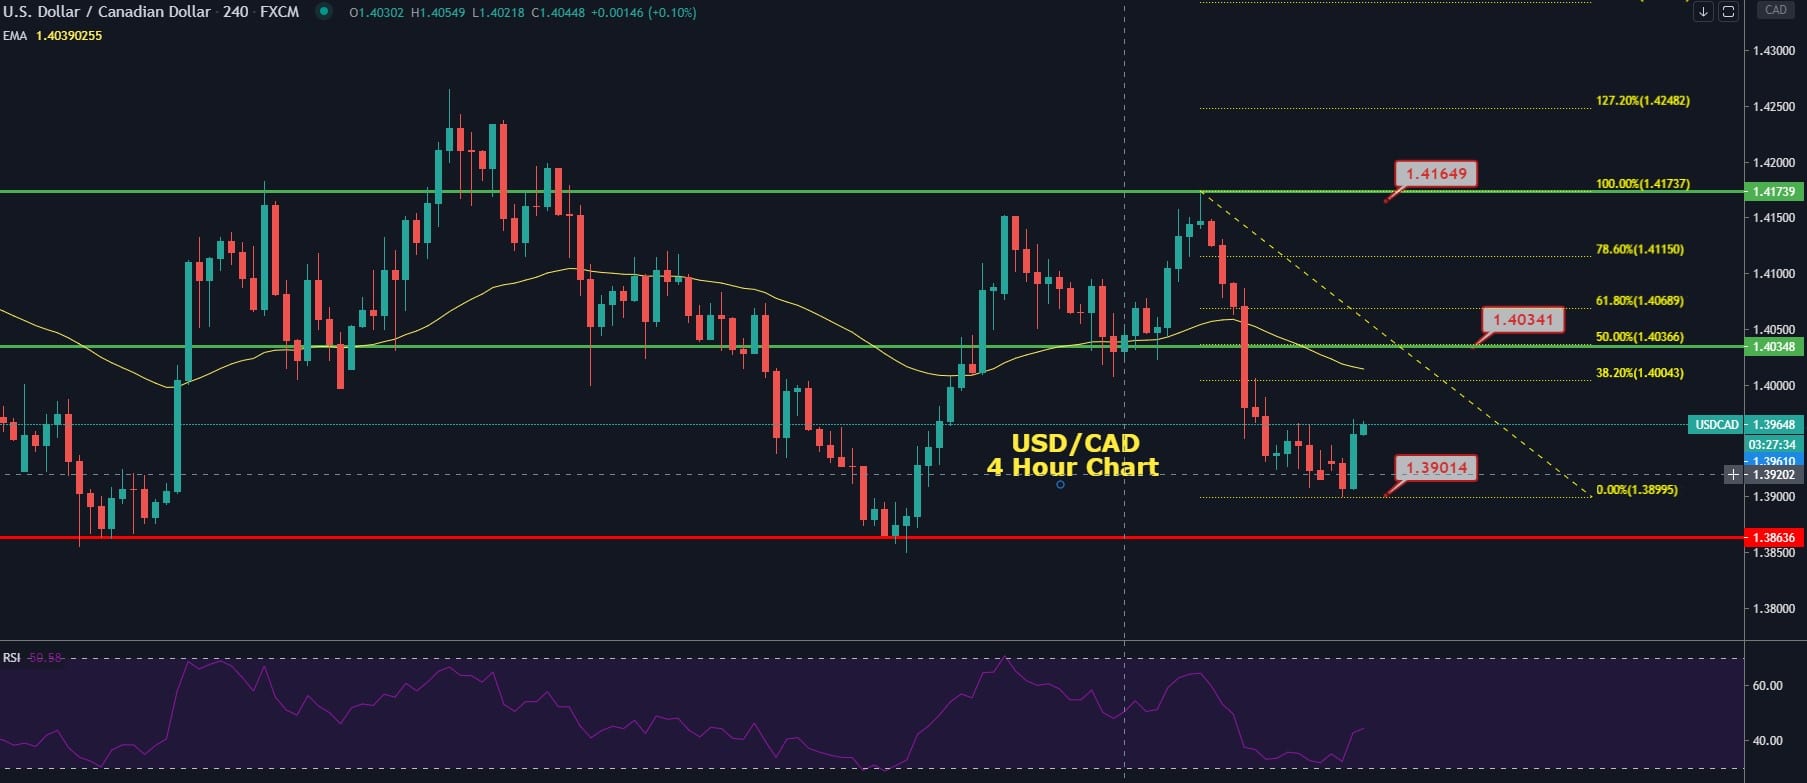 USD/CAD Is Ready for Retracement - Who's Up for It?